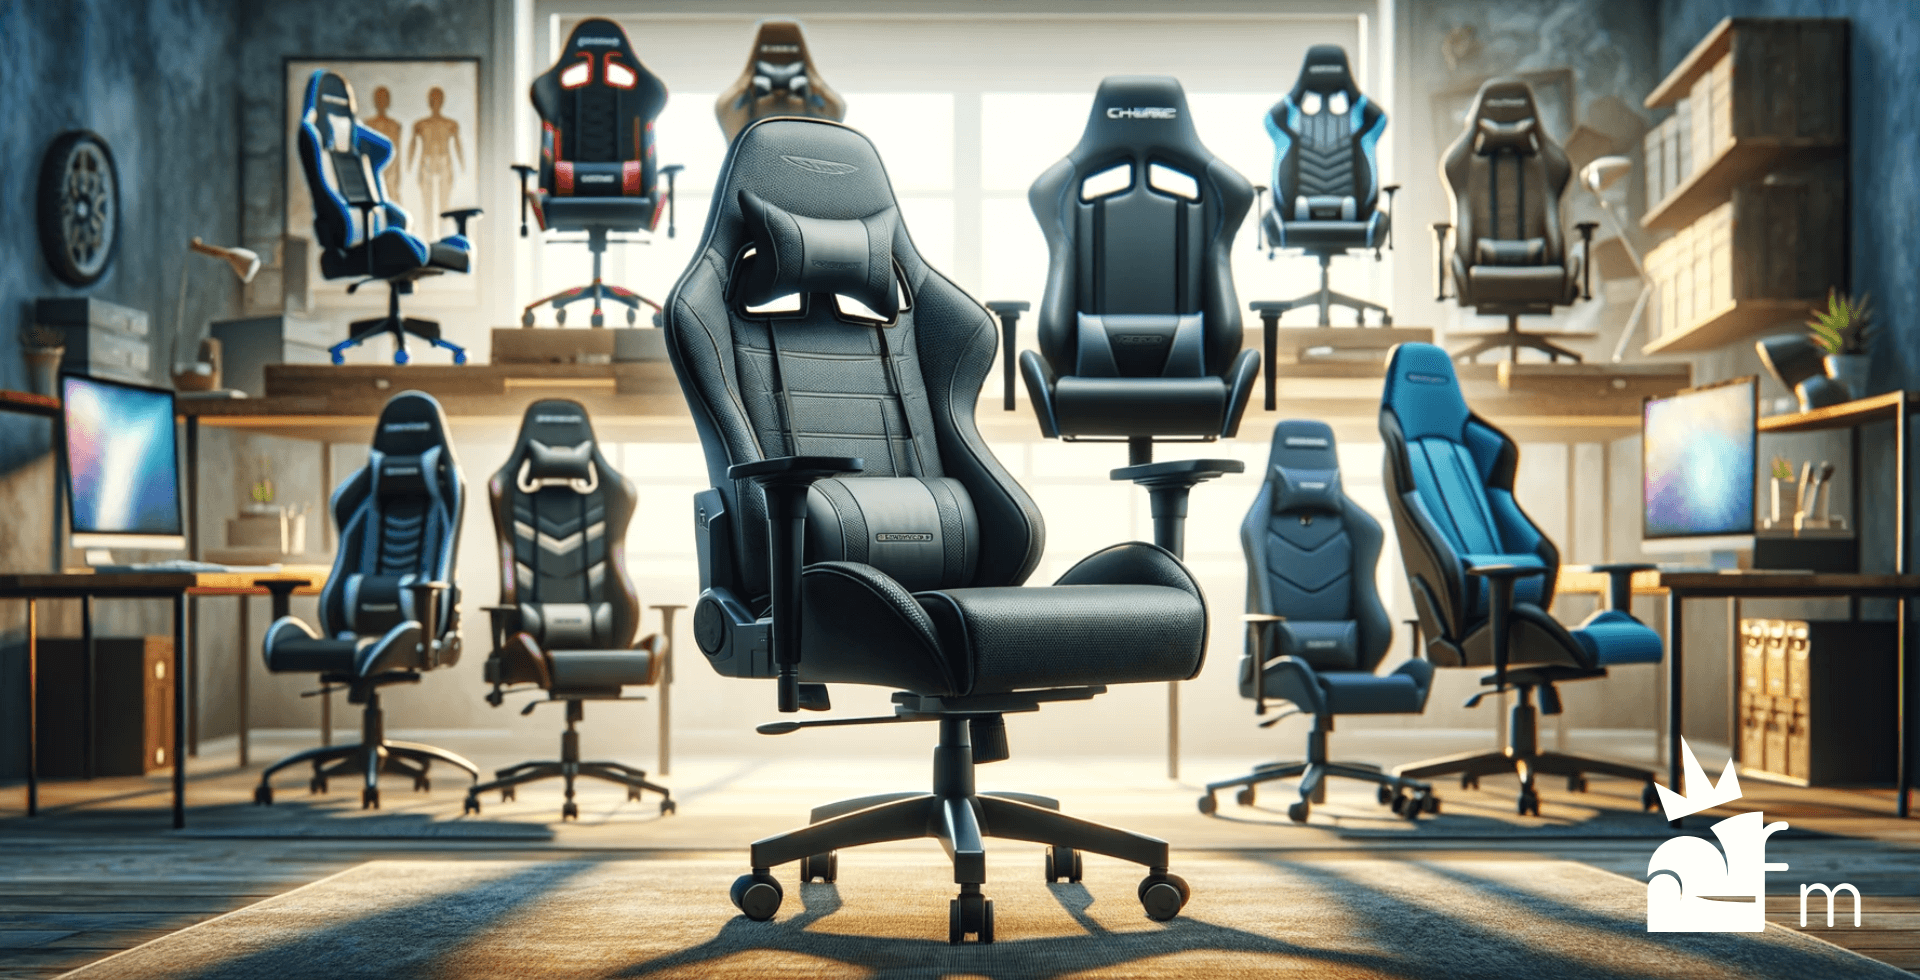 Best Gaming Chair for Bad Back